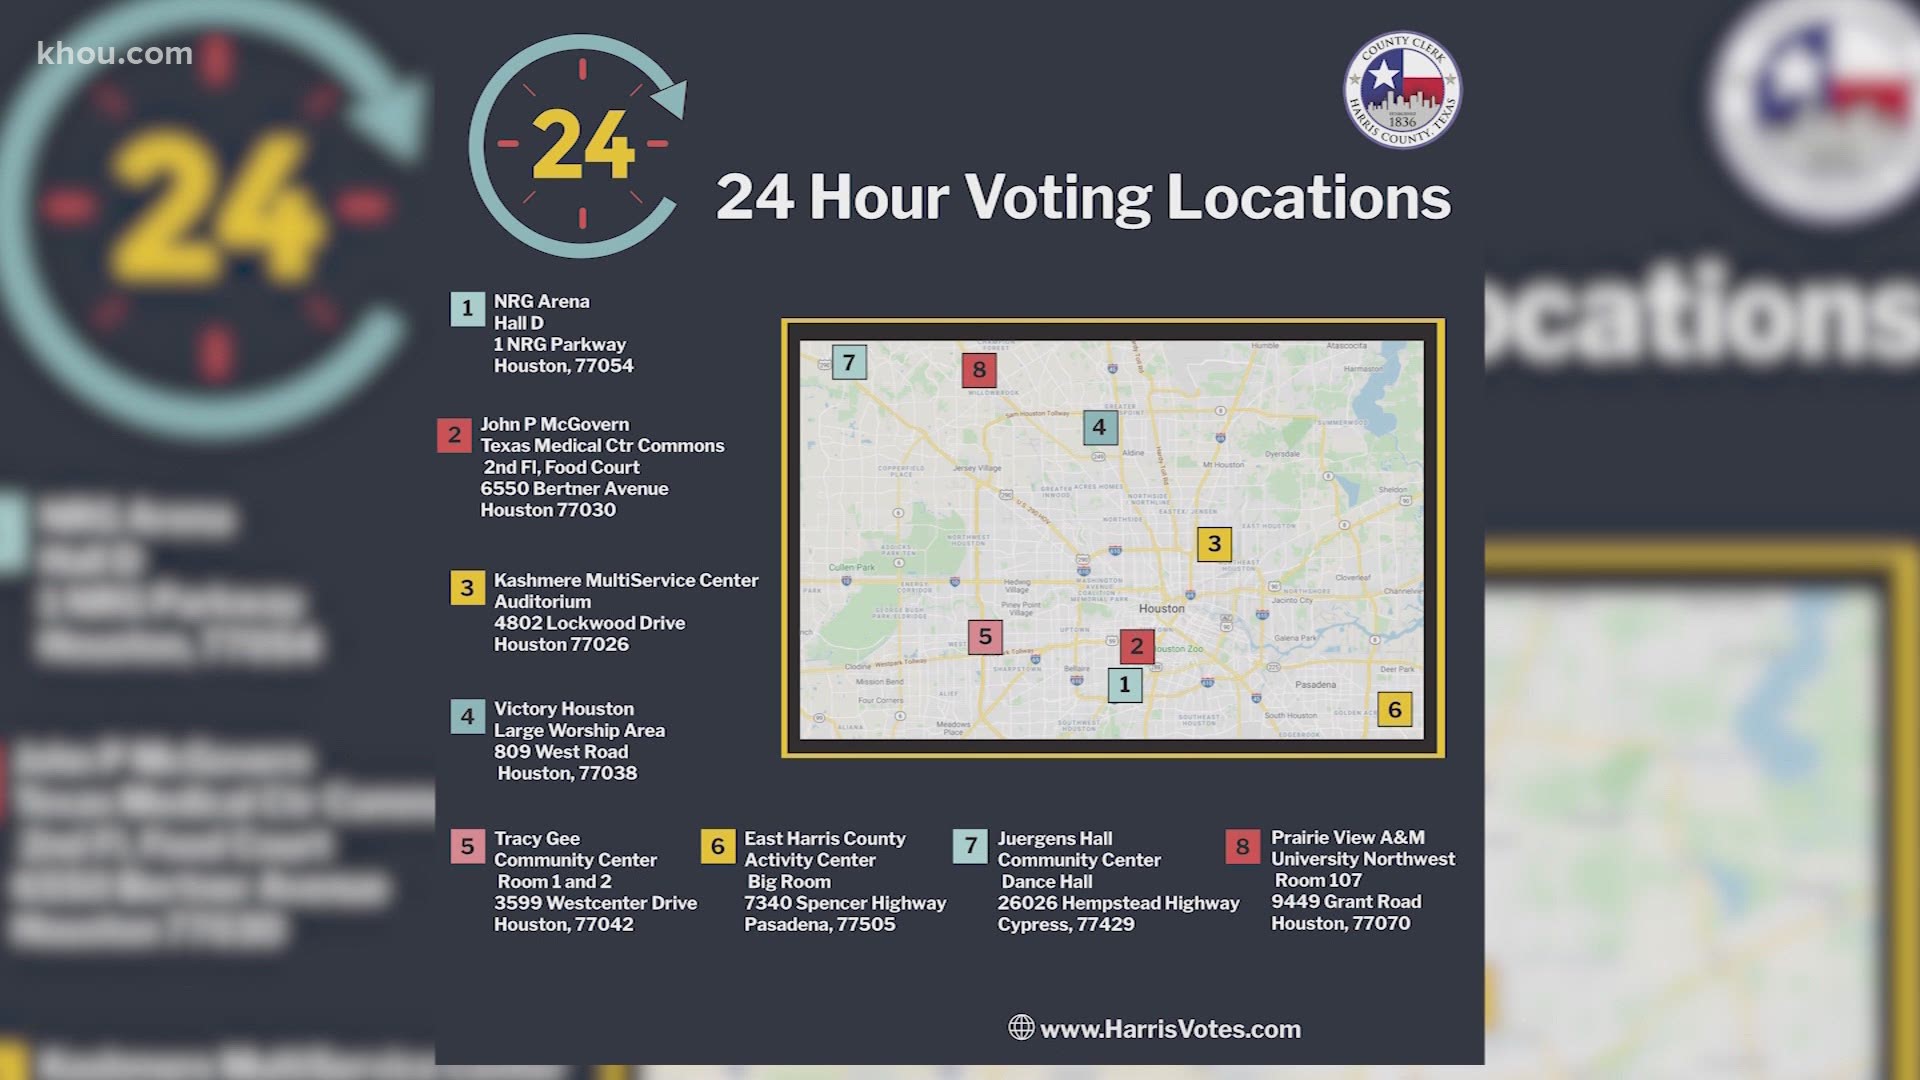 The 24-hour format was designed to allow people who work late shifts the opportunity to get to the polls.